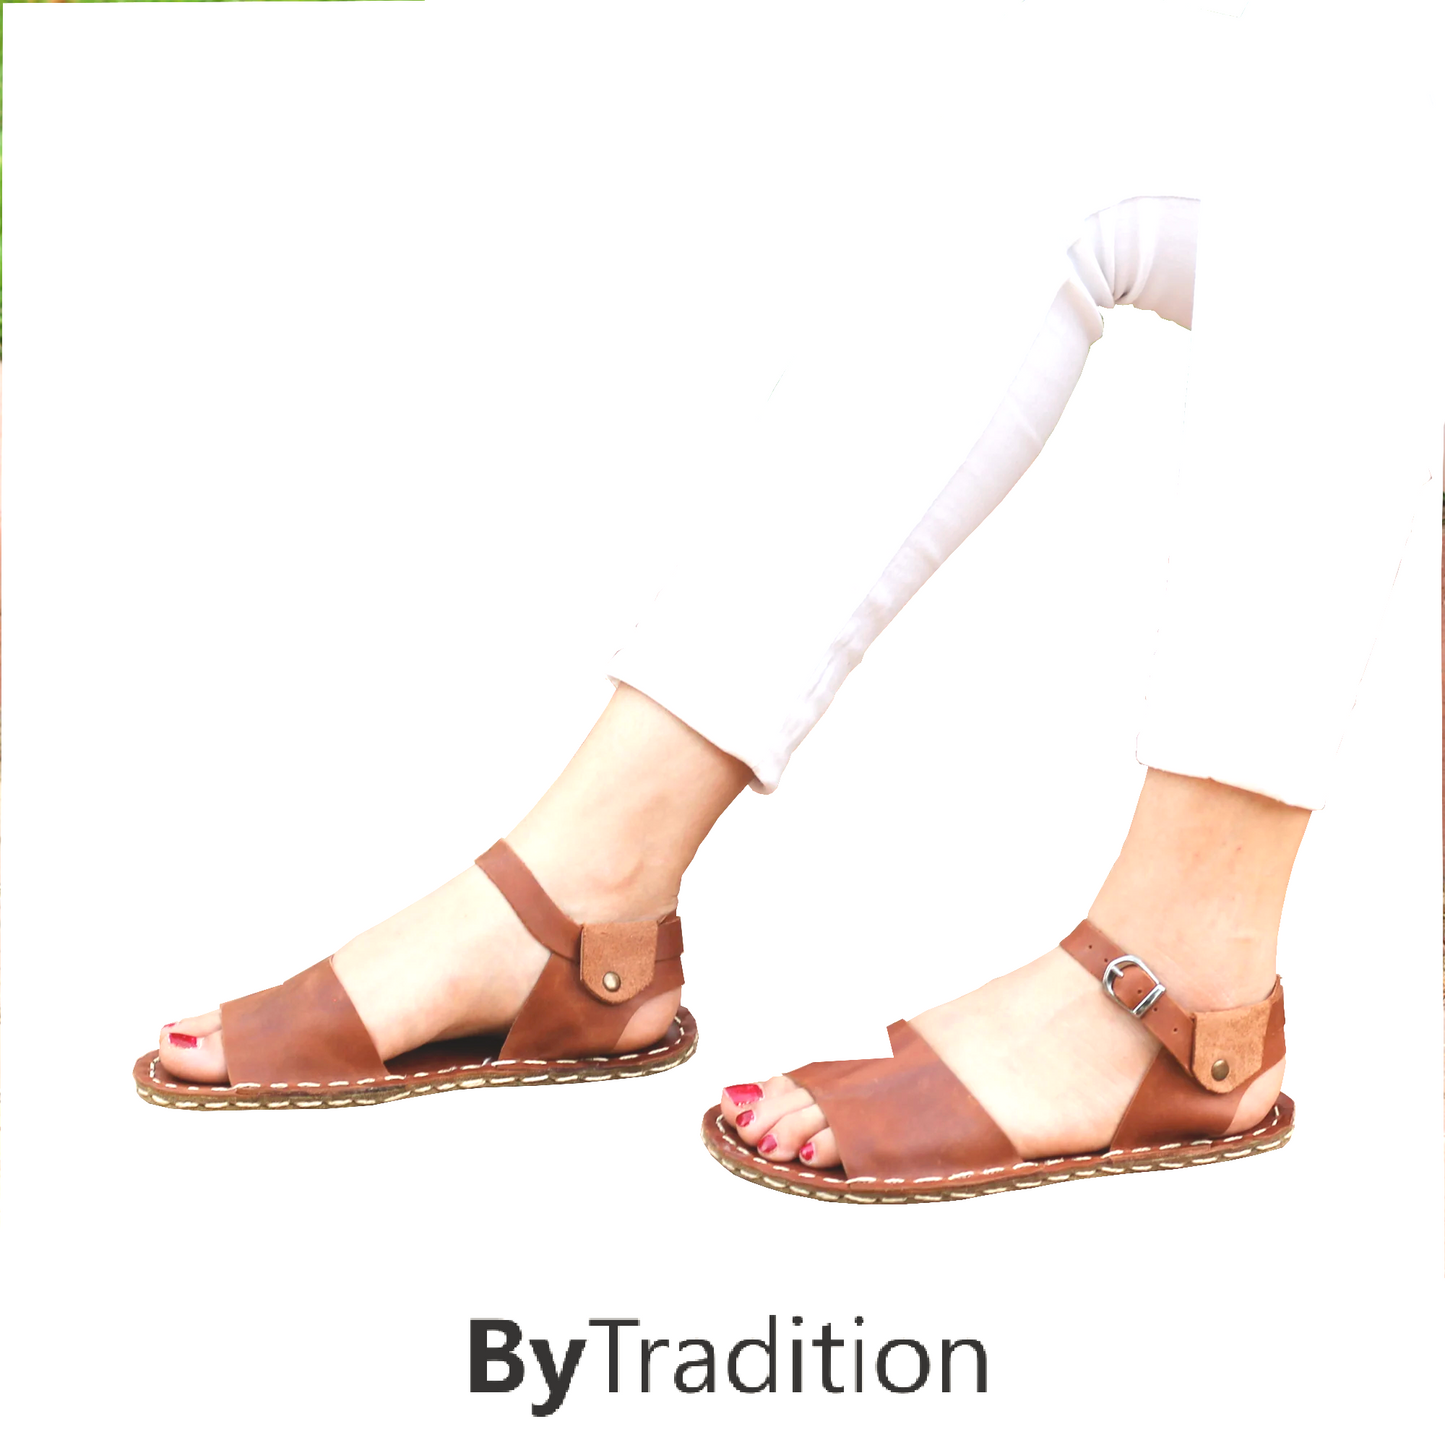 Sandal - Strap - Natural and custom barefoot - New brown